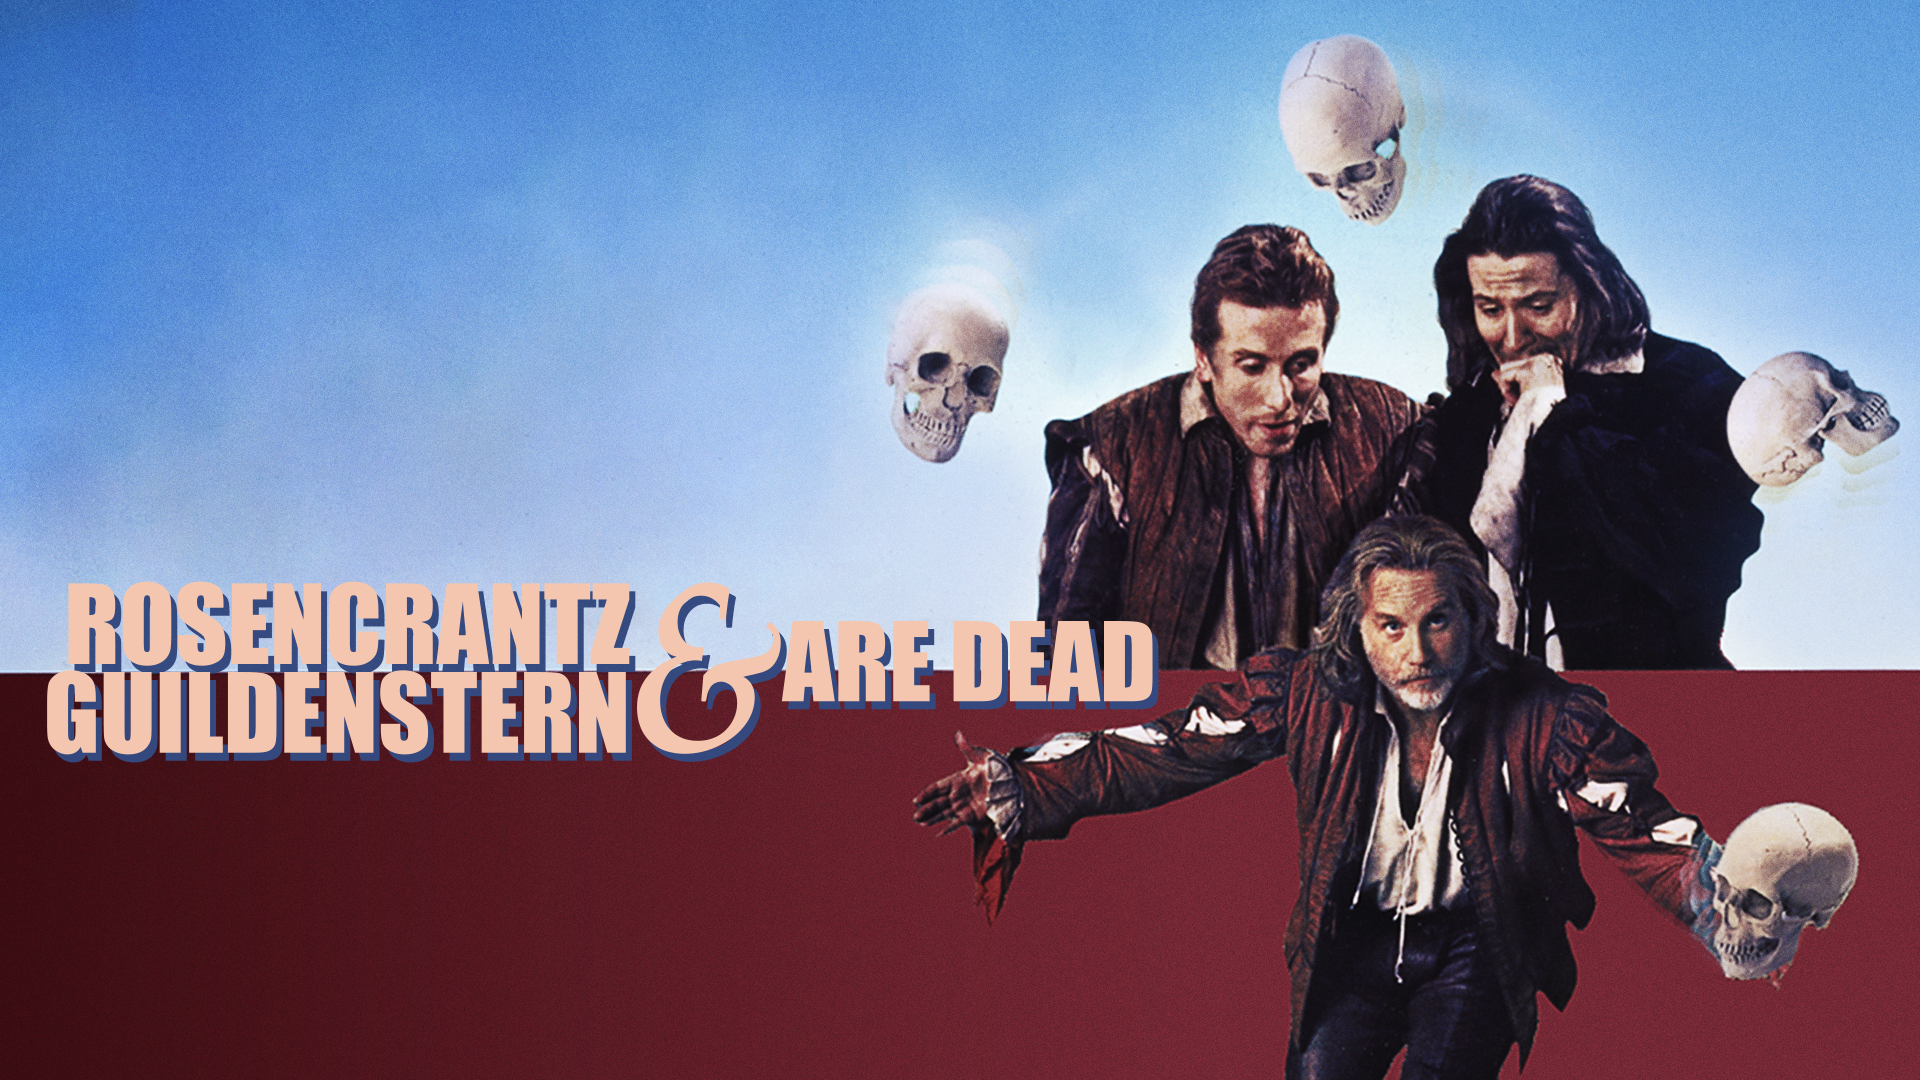 32-facts-about-the-movie-rosencrantz-and-guildenstern-are-dead